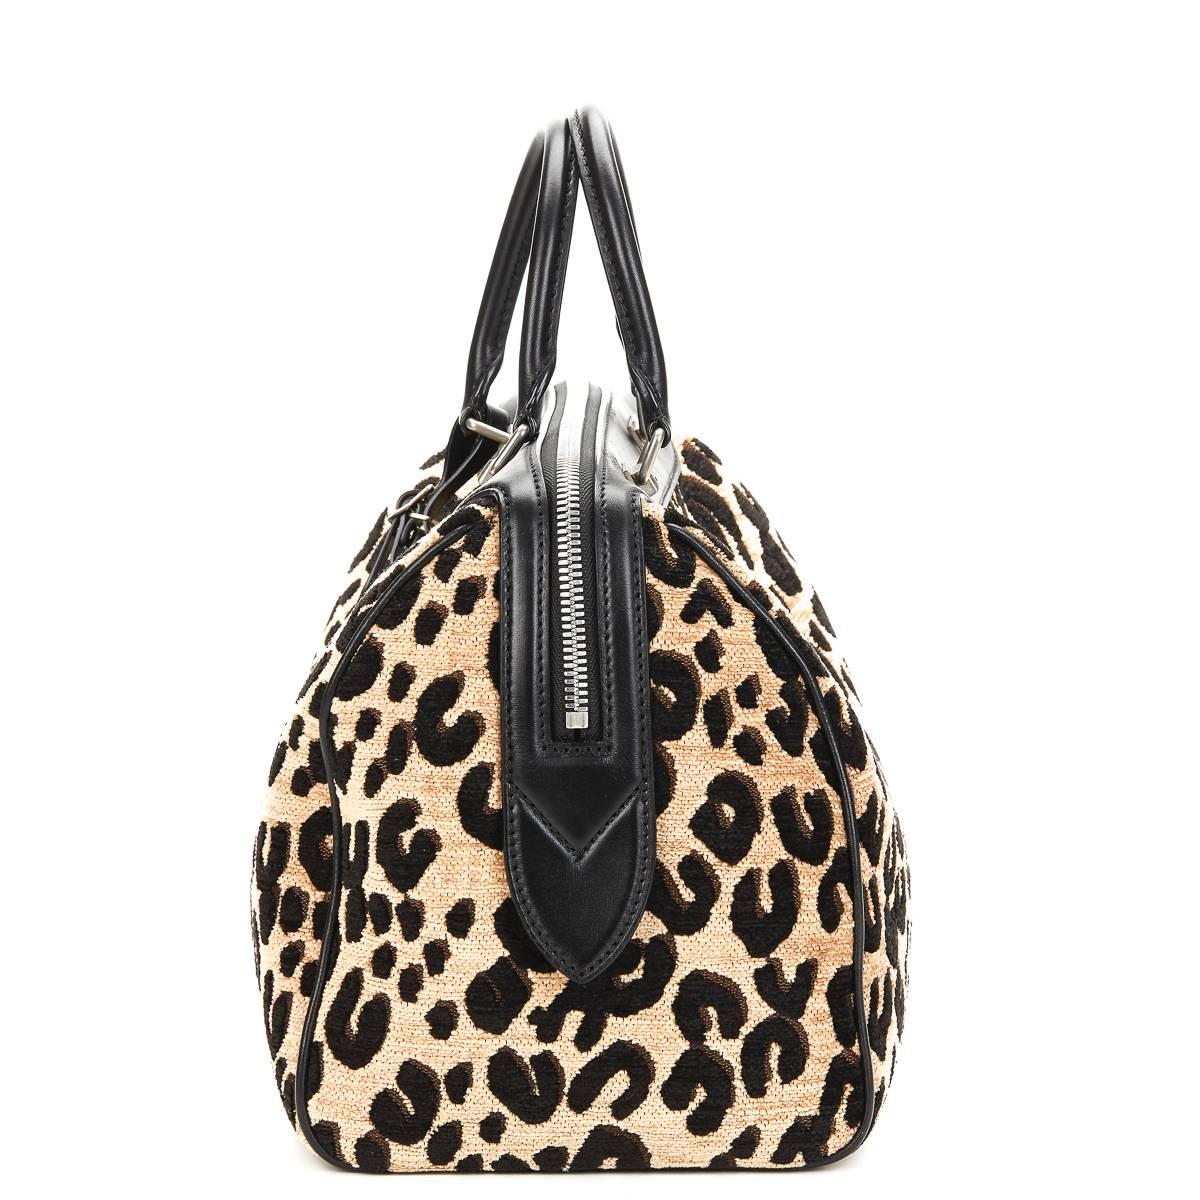 LOUIS VUITTON
Leopard Print Jacquard Velvet Stephen Sprouse Speedy 30

This LOUIS VUITTON Speedy 30 is in Excellent Pre-Owned Condition accompanied by Louis Vuitton Dust Bag, Care Card, Luggage Tag. Circa 2012. Primarily made from Velvet